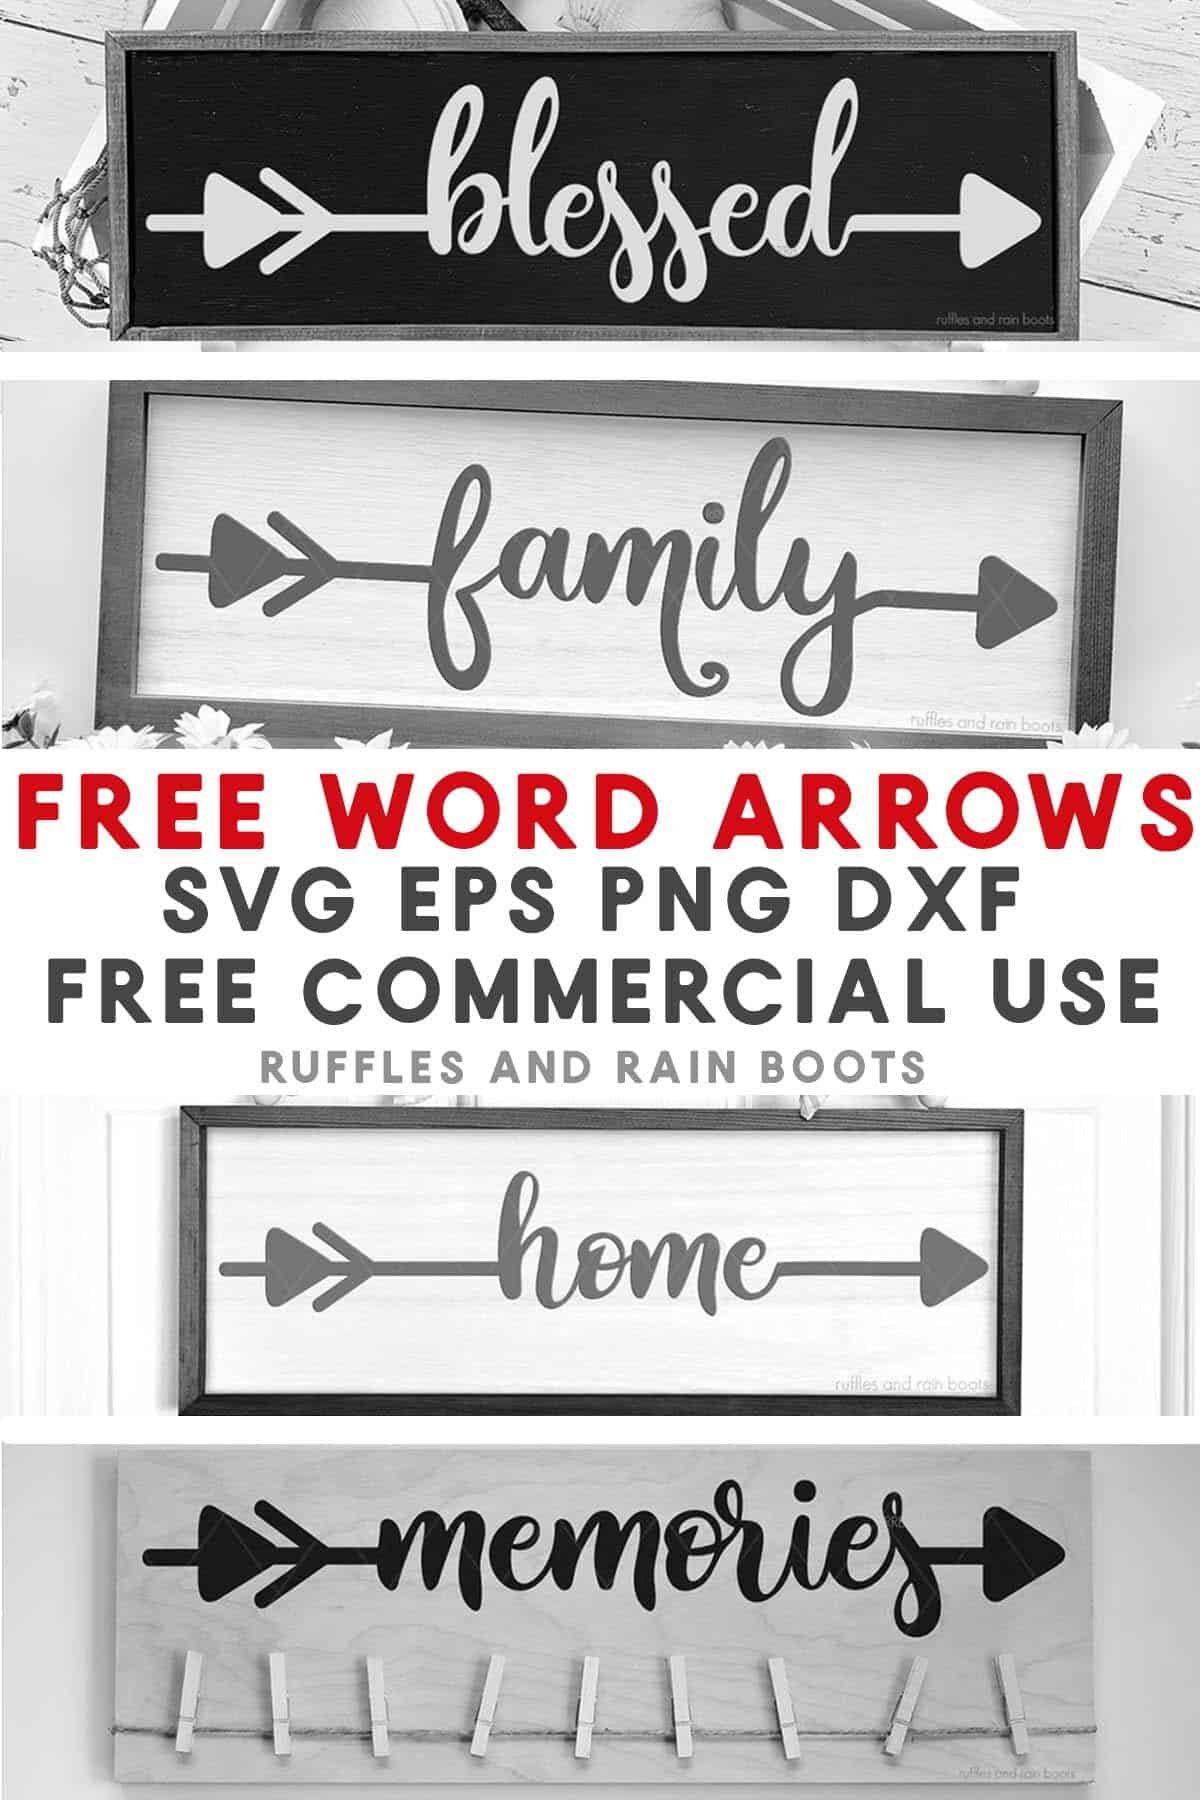 Four image black and white collage of farmhouse signs made with free word arrows SVG.